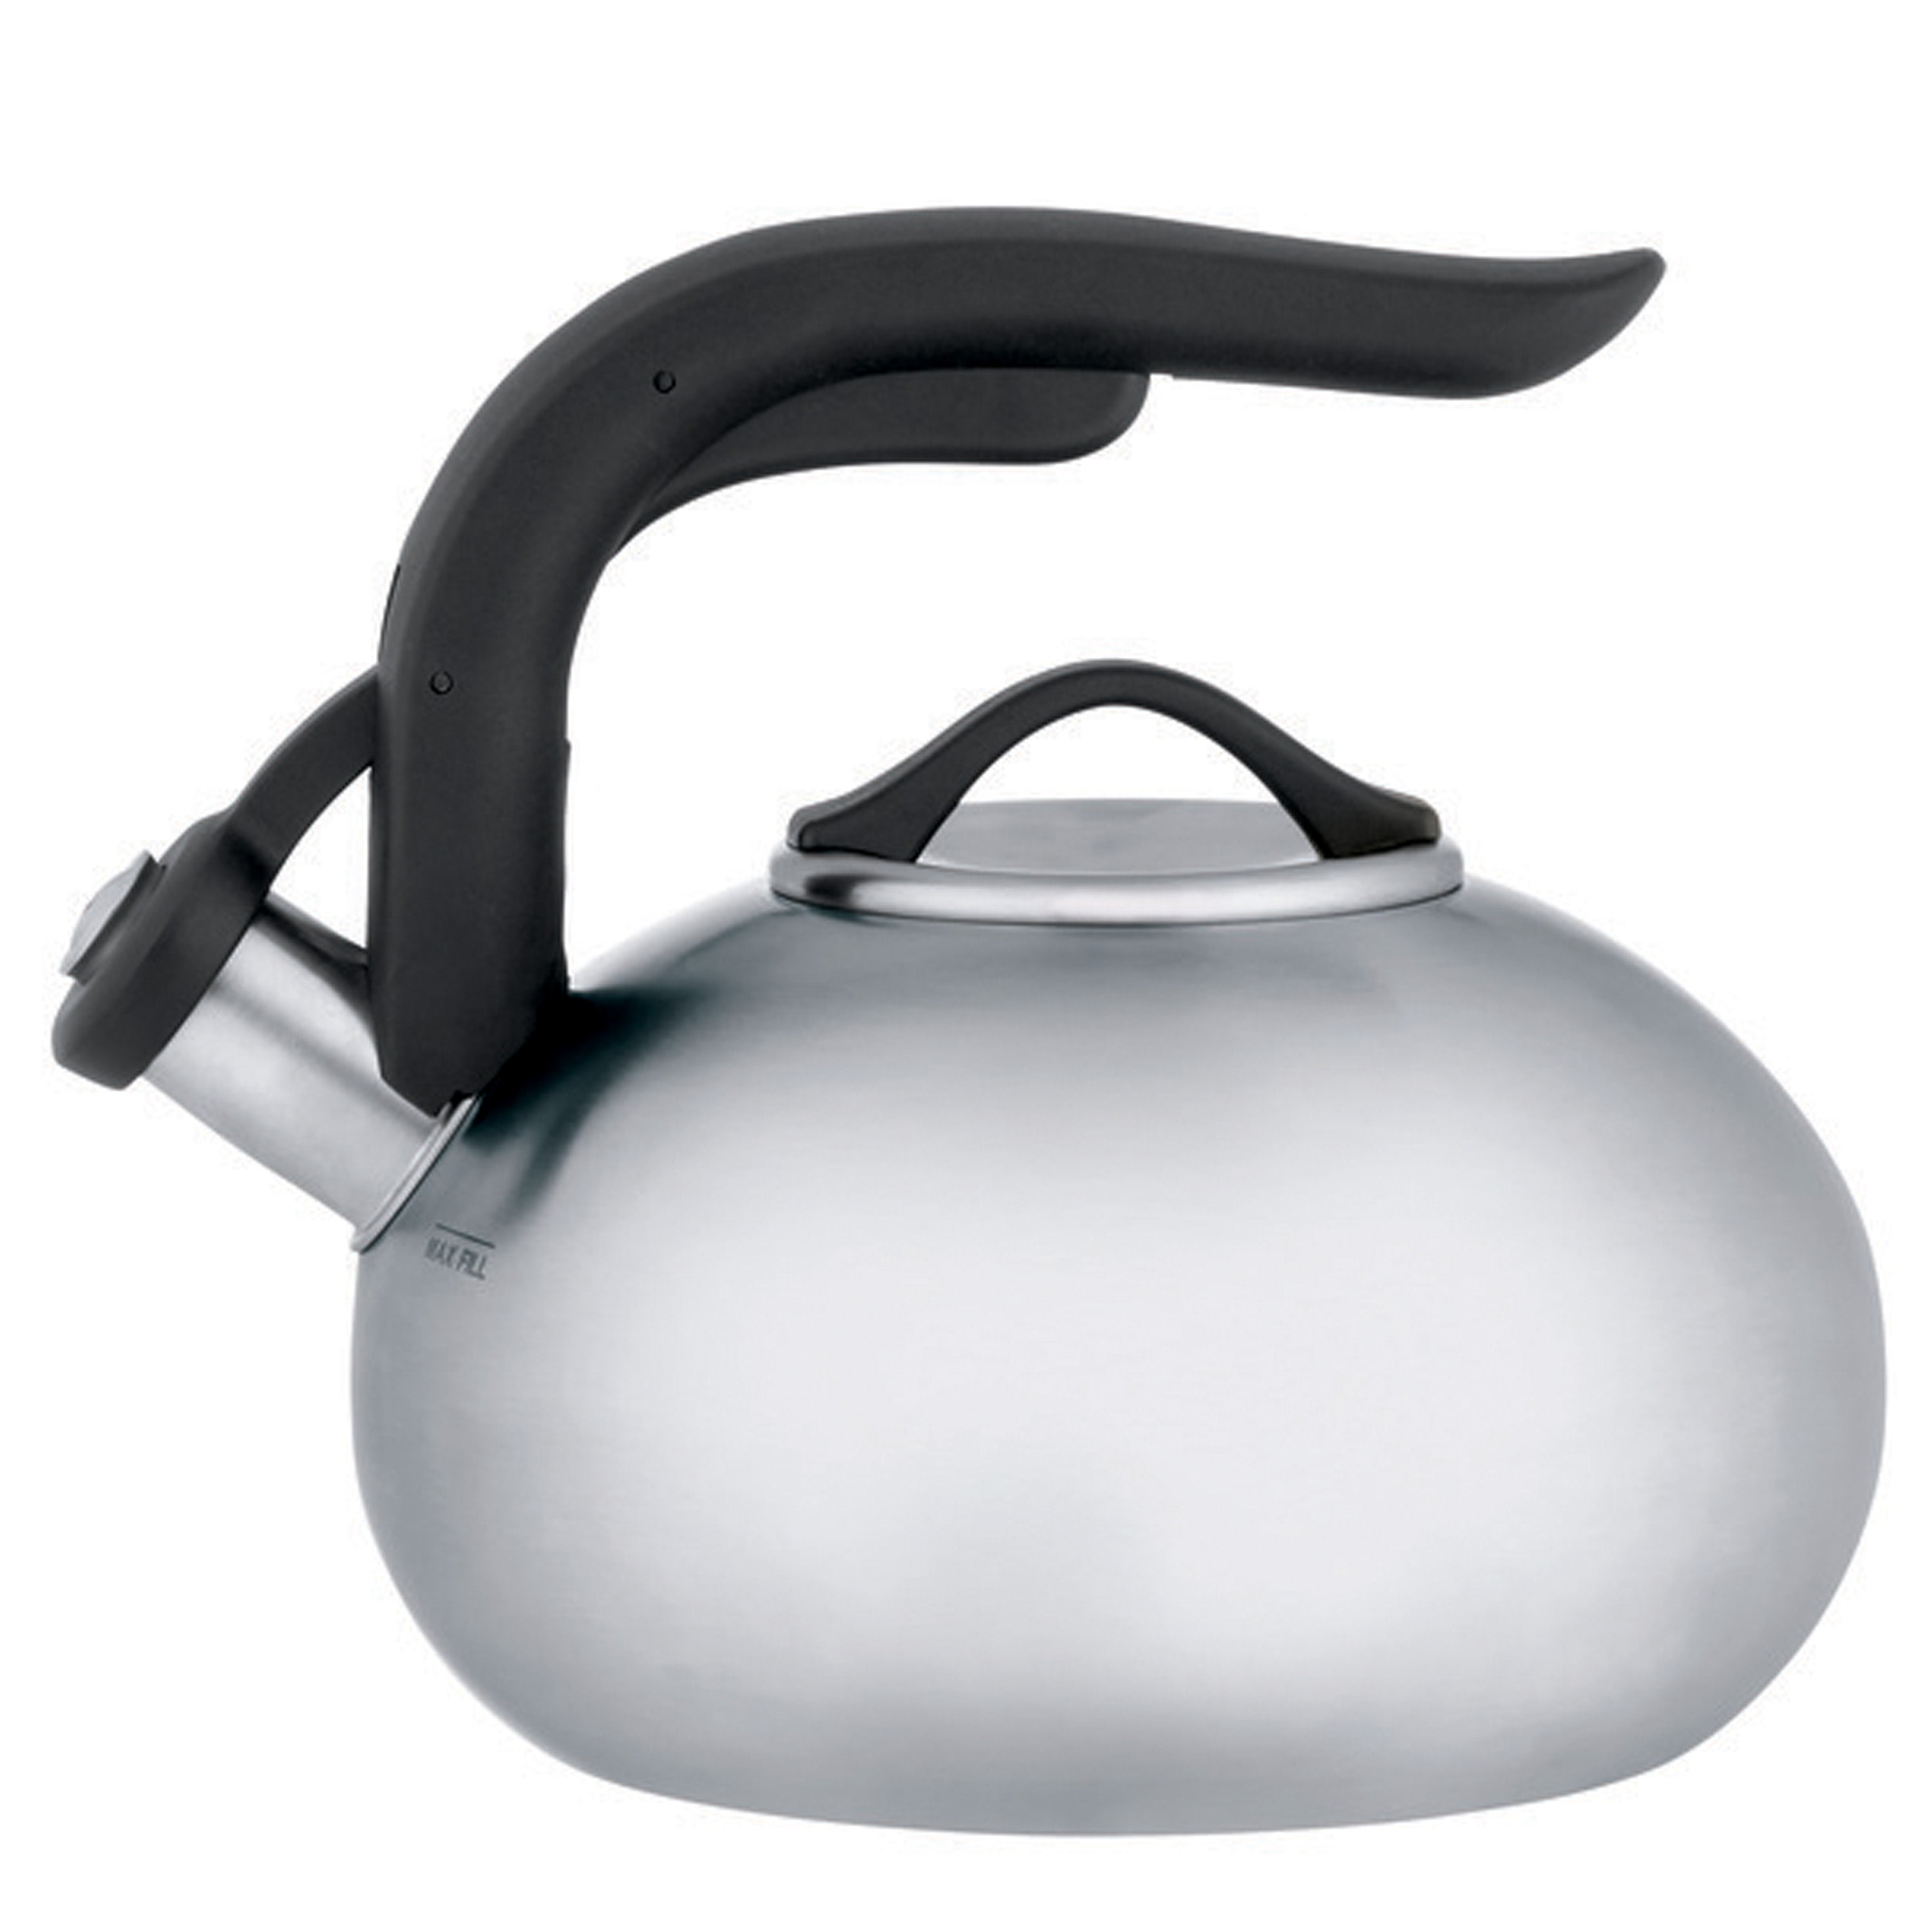 Copco Valencia Brushed Stainless Steel 2.3 Quart Tea Kettle 